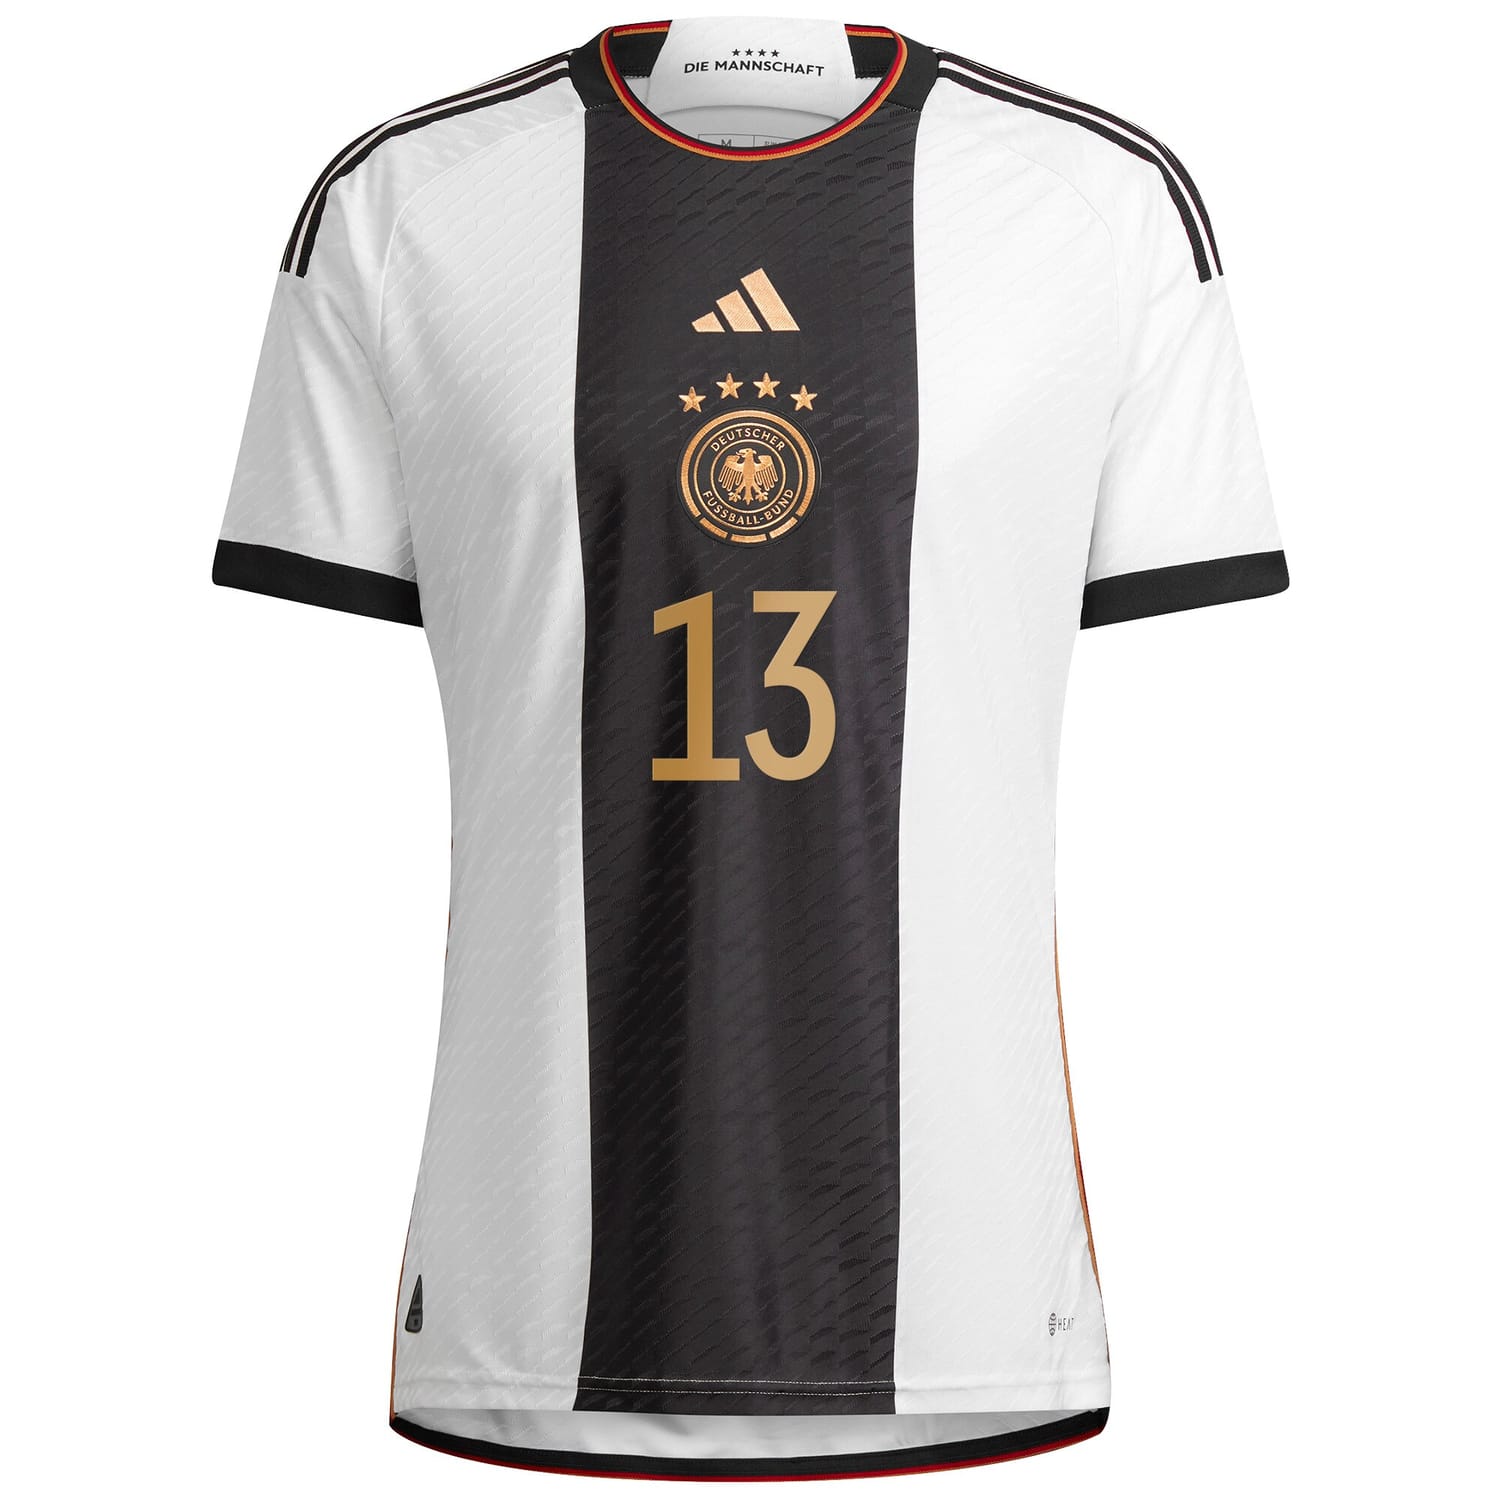 Germany National Team Home Authentic Jersey Shirt player Thomas Müller 13 printing for Men